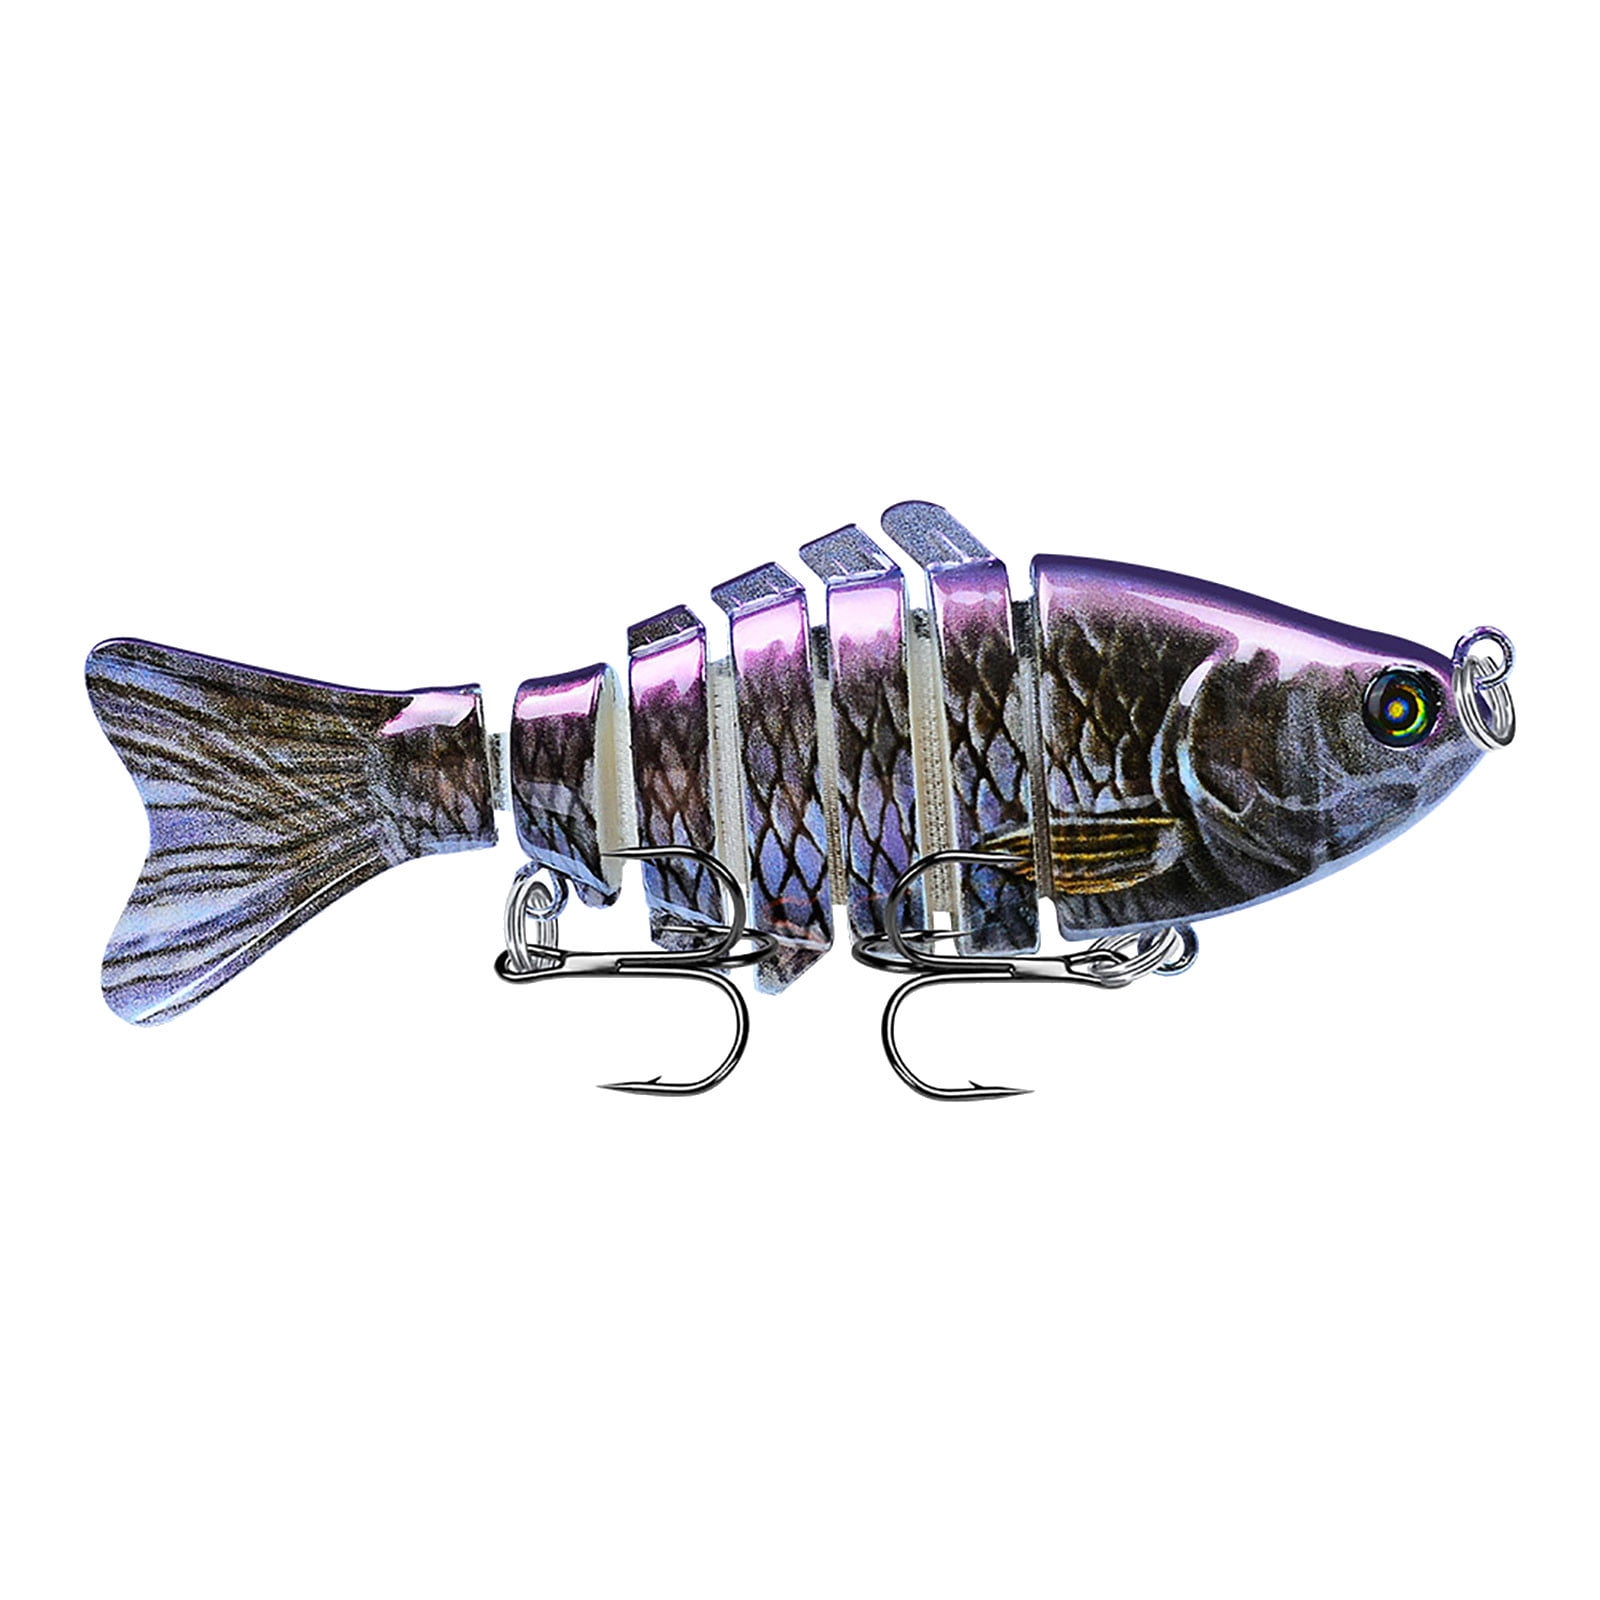 Fishing Lures for Bass Trout Multi Jointed Swimbait Slow Sinking Bionic  Swimming Lures Micro-Jointed Swimbait, 10cm Road Sub Bait Plastic Hard Bait,  15.5g Multi Knot Fish Simulation Bait Pseudo Bait C 